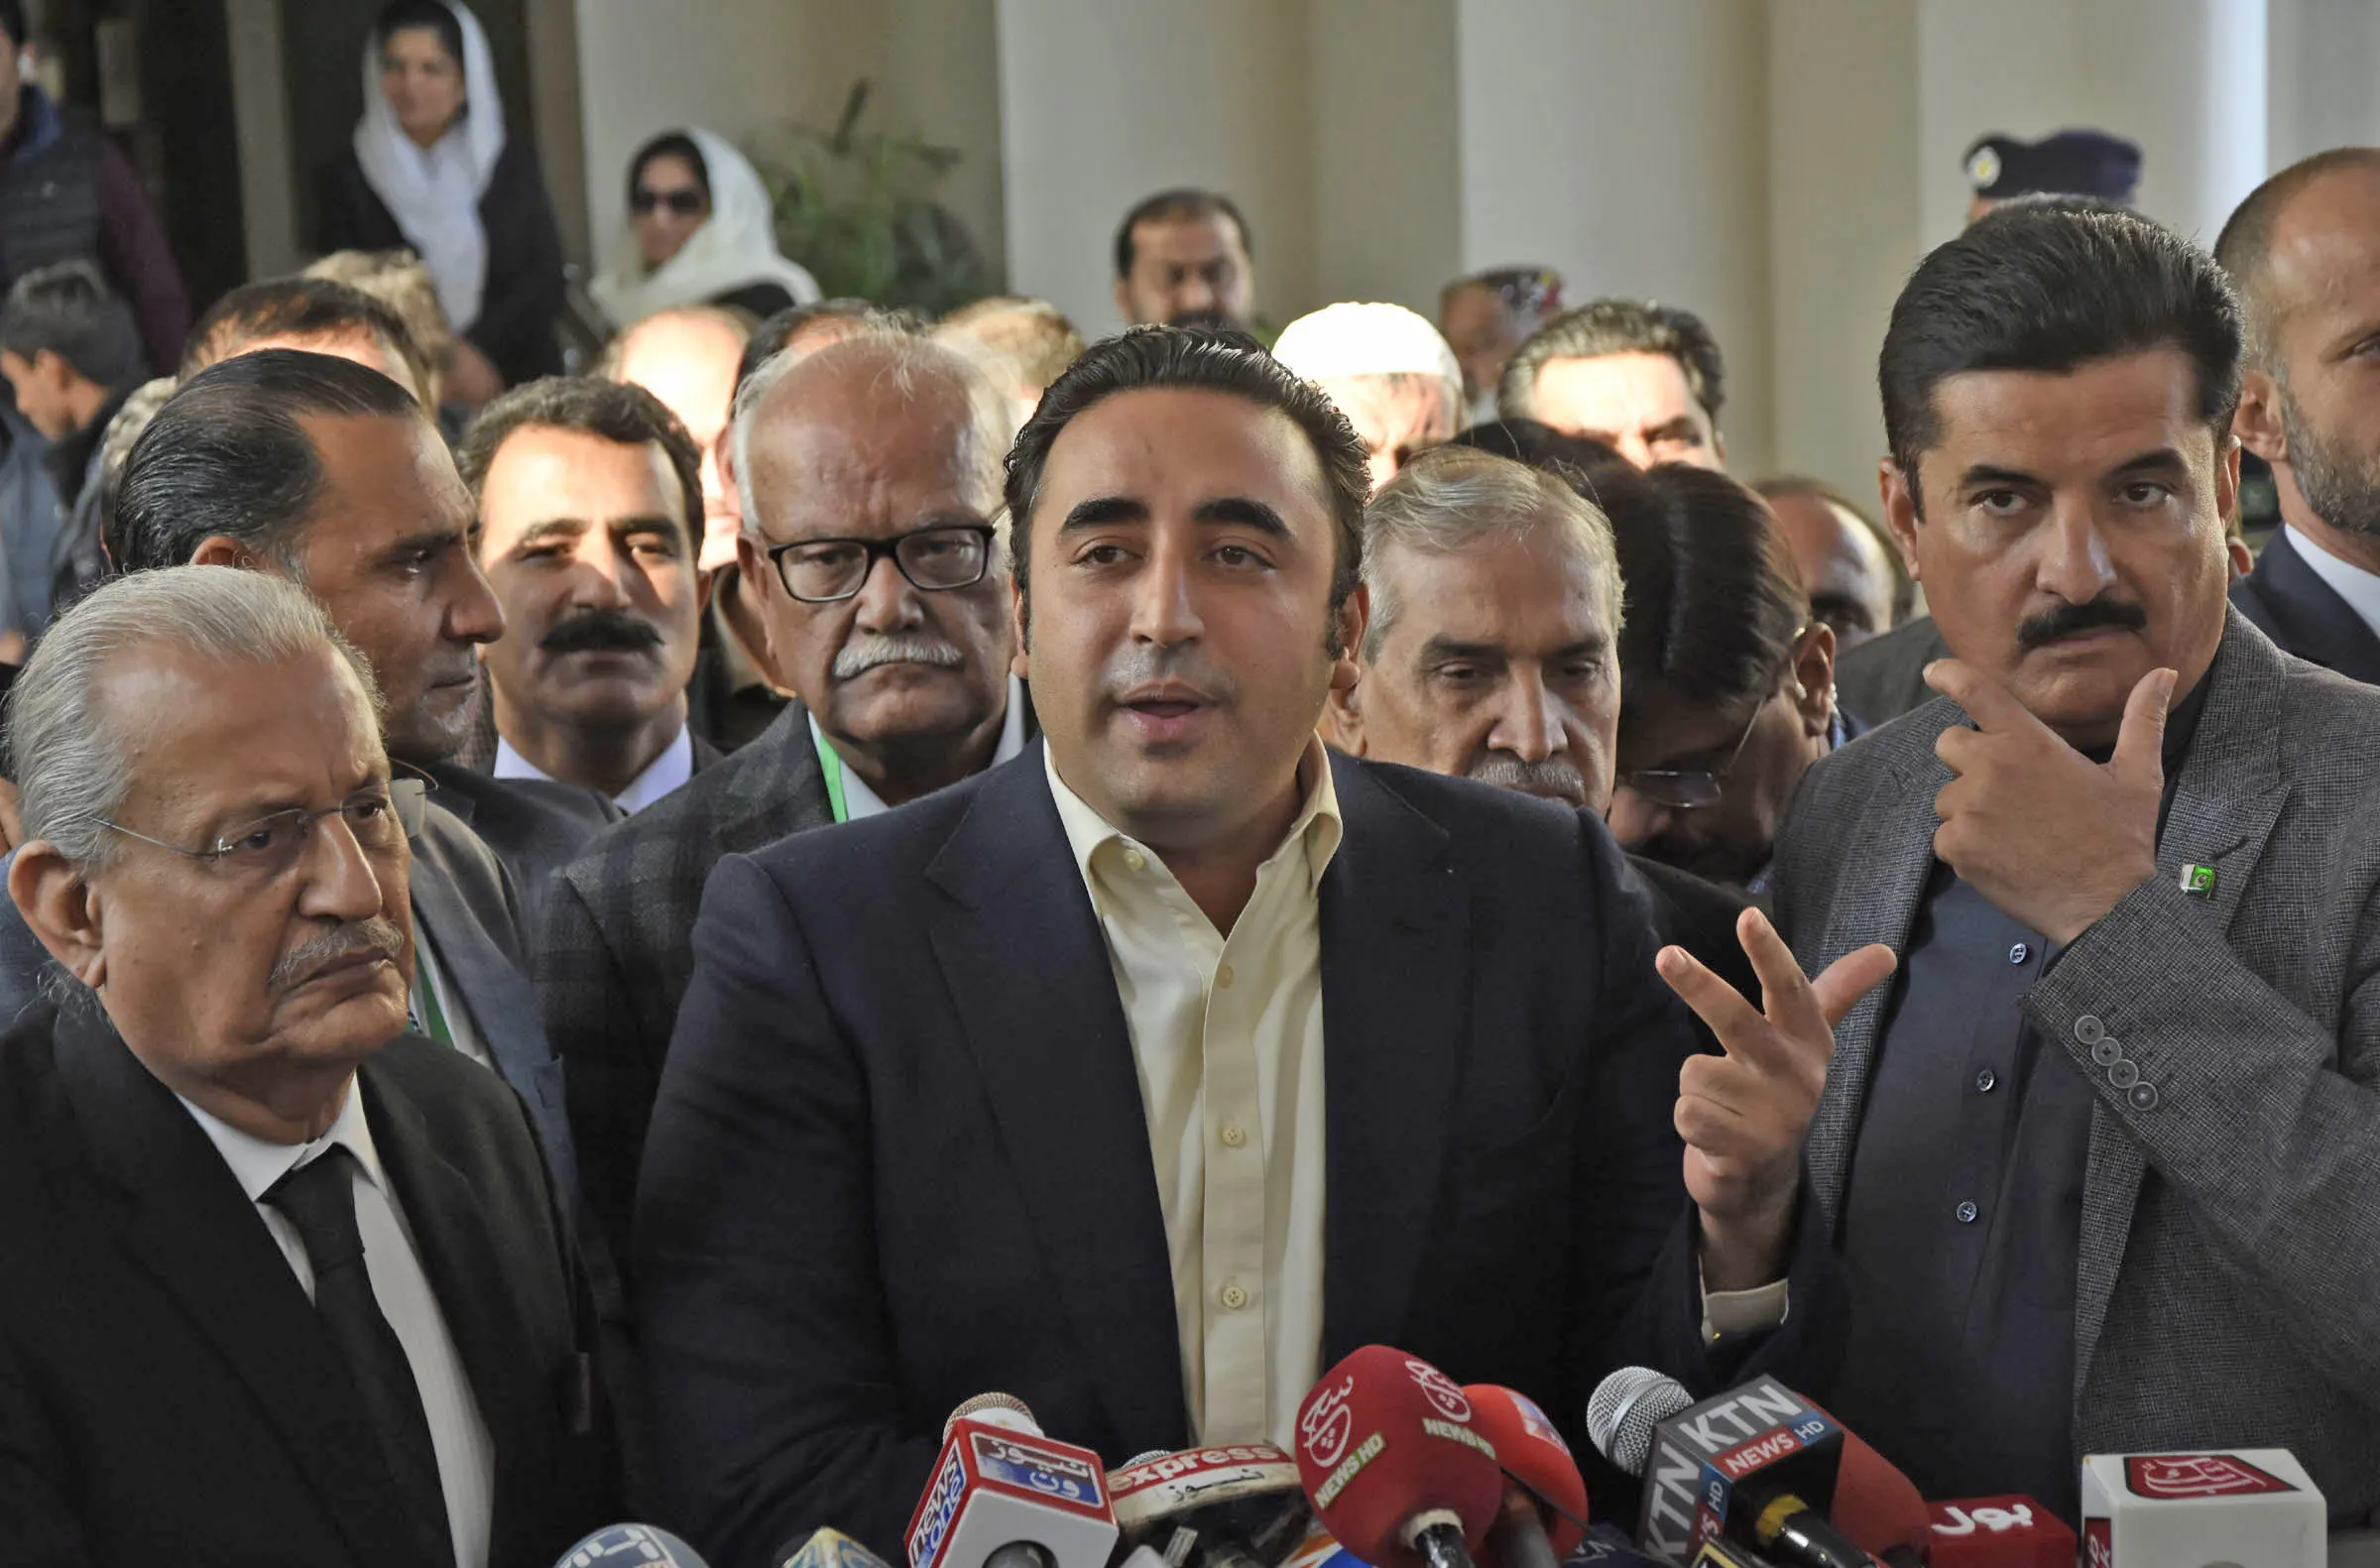 Those who were part of Zia dictatorship should be exposed: Bilawal